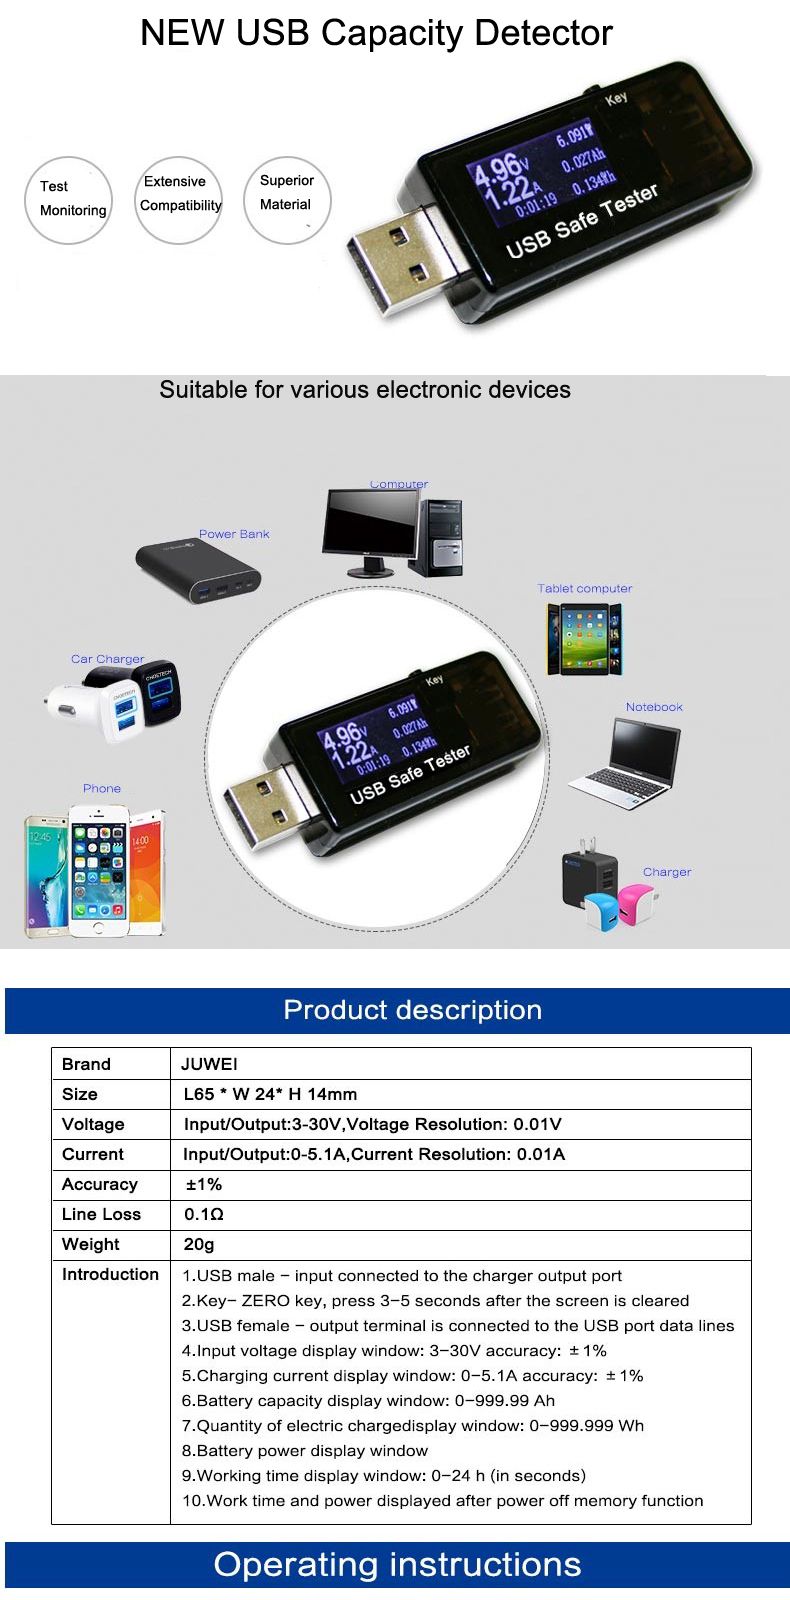 Digital-DC-USB-Tester-Current-Voltage-Charger-Capacity-Power-Bank-Battery-DetectorQR2030-Trigger-1170137